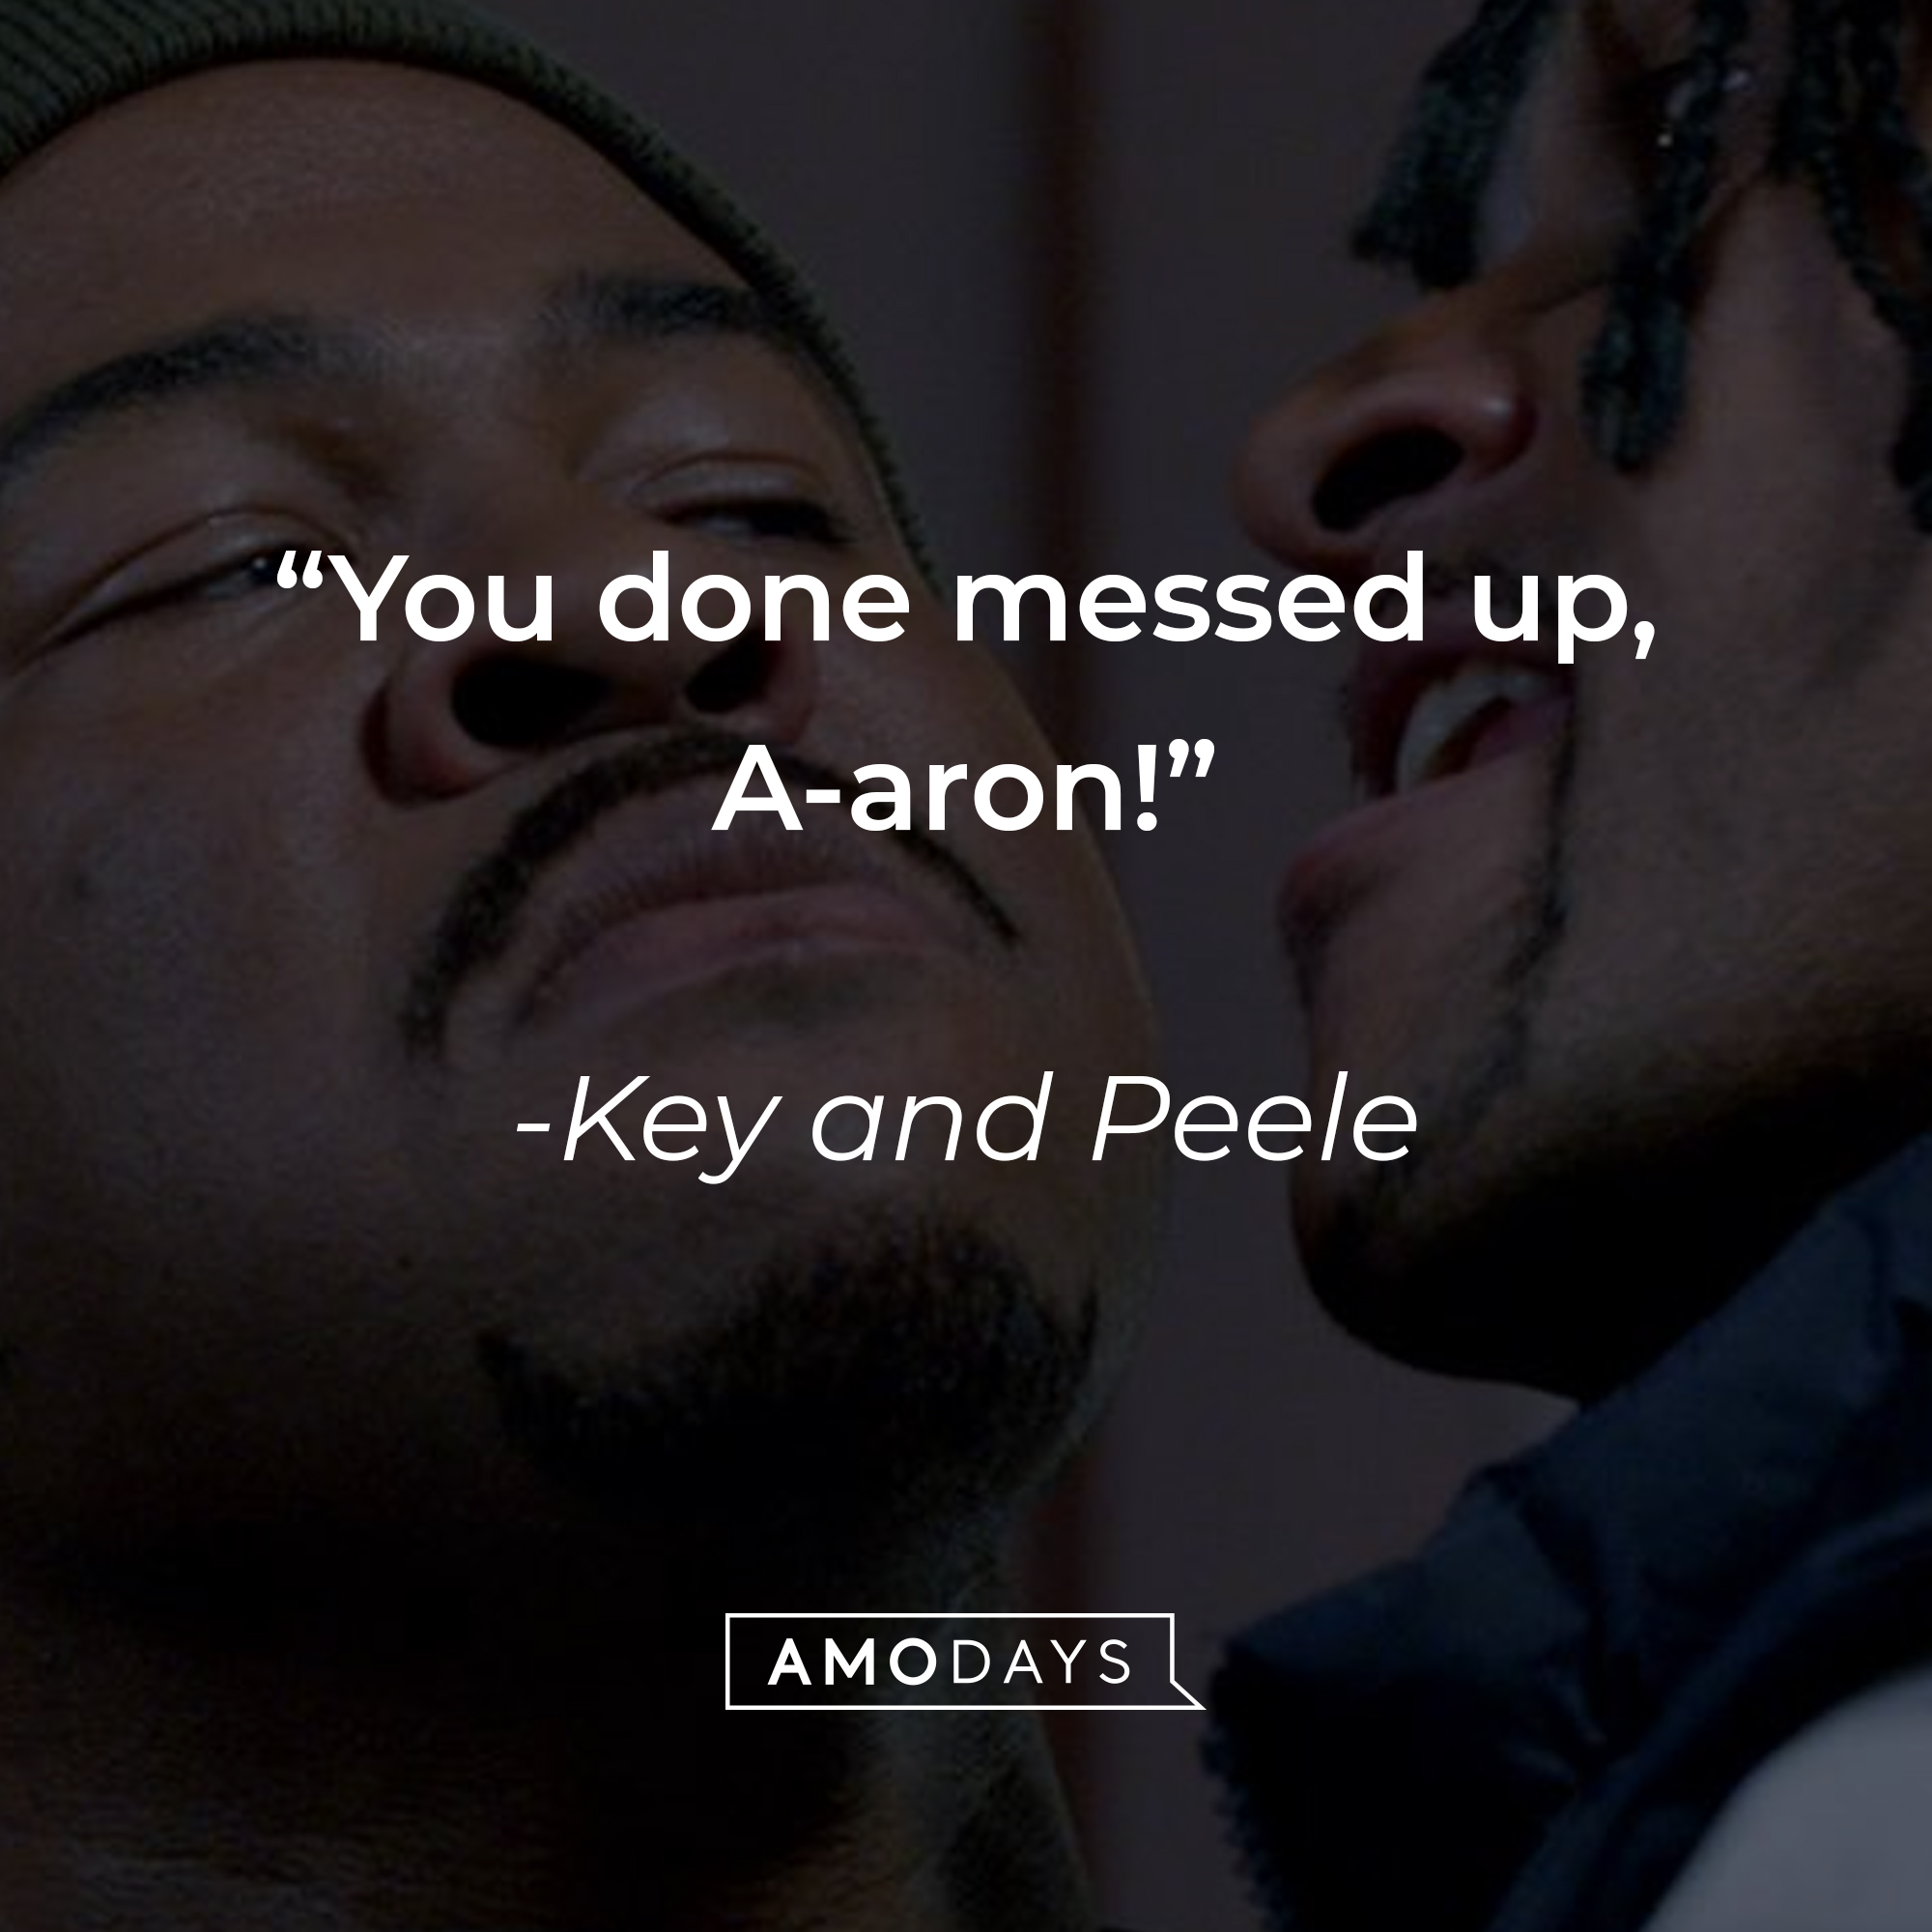 "Key and Peele's" quote: “You done messed up, A-aron!” | Source: facebook.com/KeyAndPeele